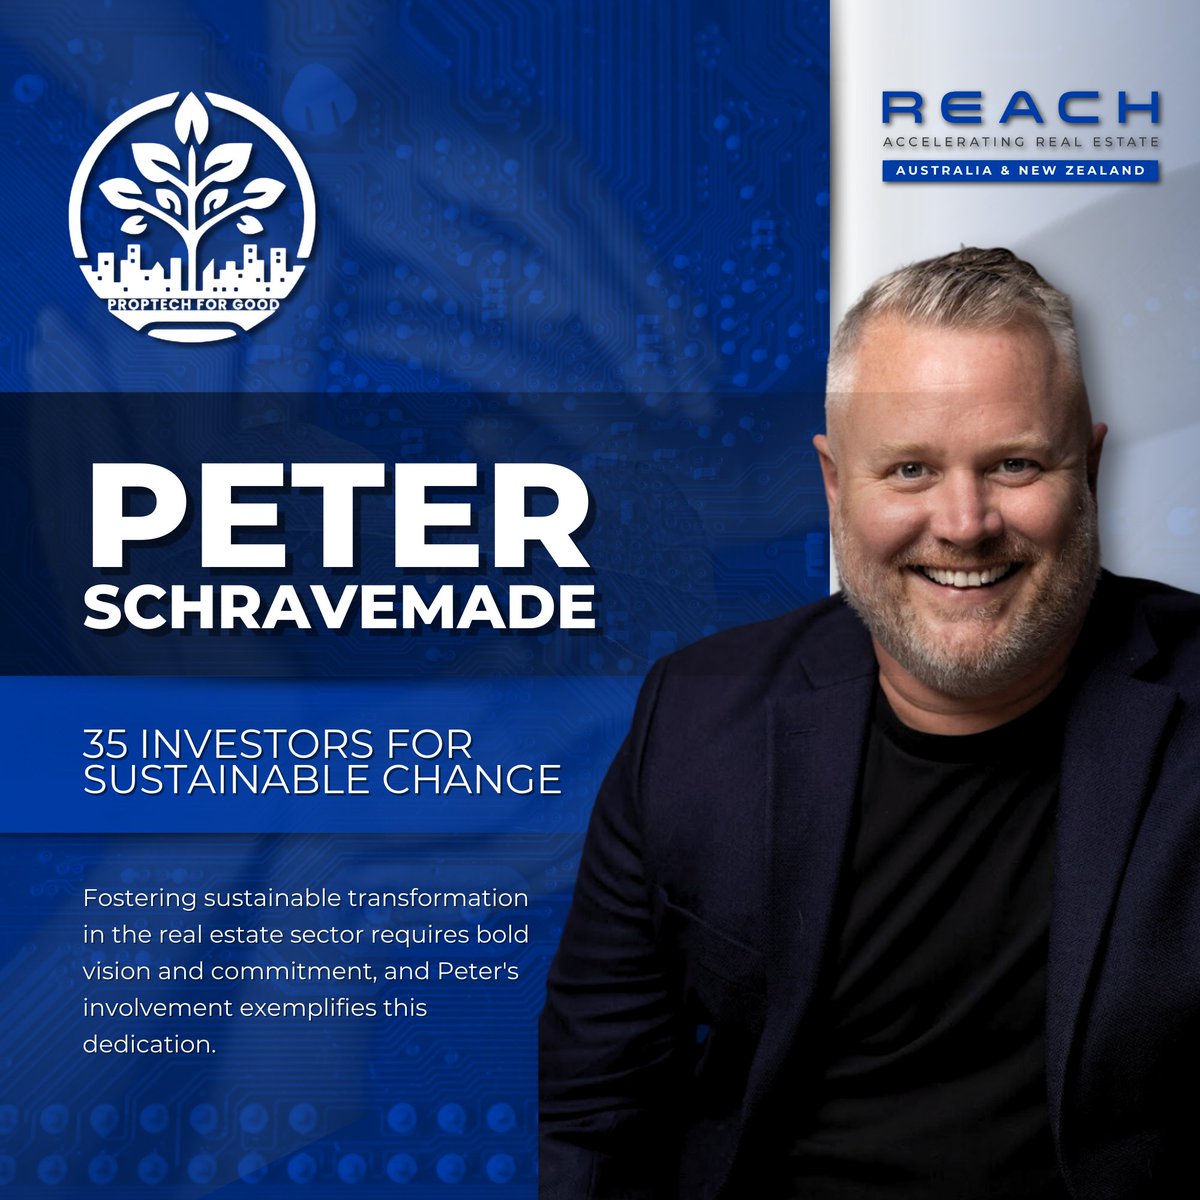 🌟 Congratulations to our very own Peter Schravemade for being recognised as one of the 35 Investors for Sustainable Change by The PropTech for Good, a global initiative uniting real estate experts, innovators, tech pioneers, urban visionaries, and environmental enthusiasts.